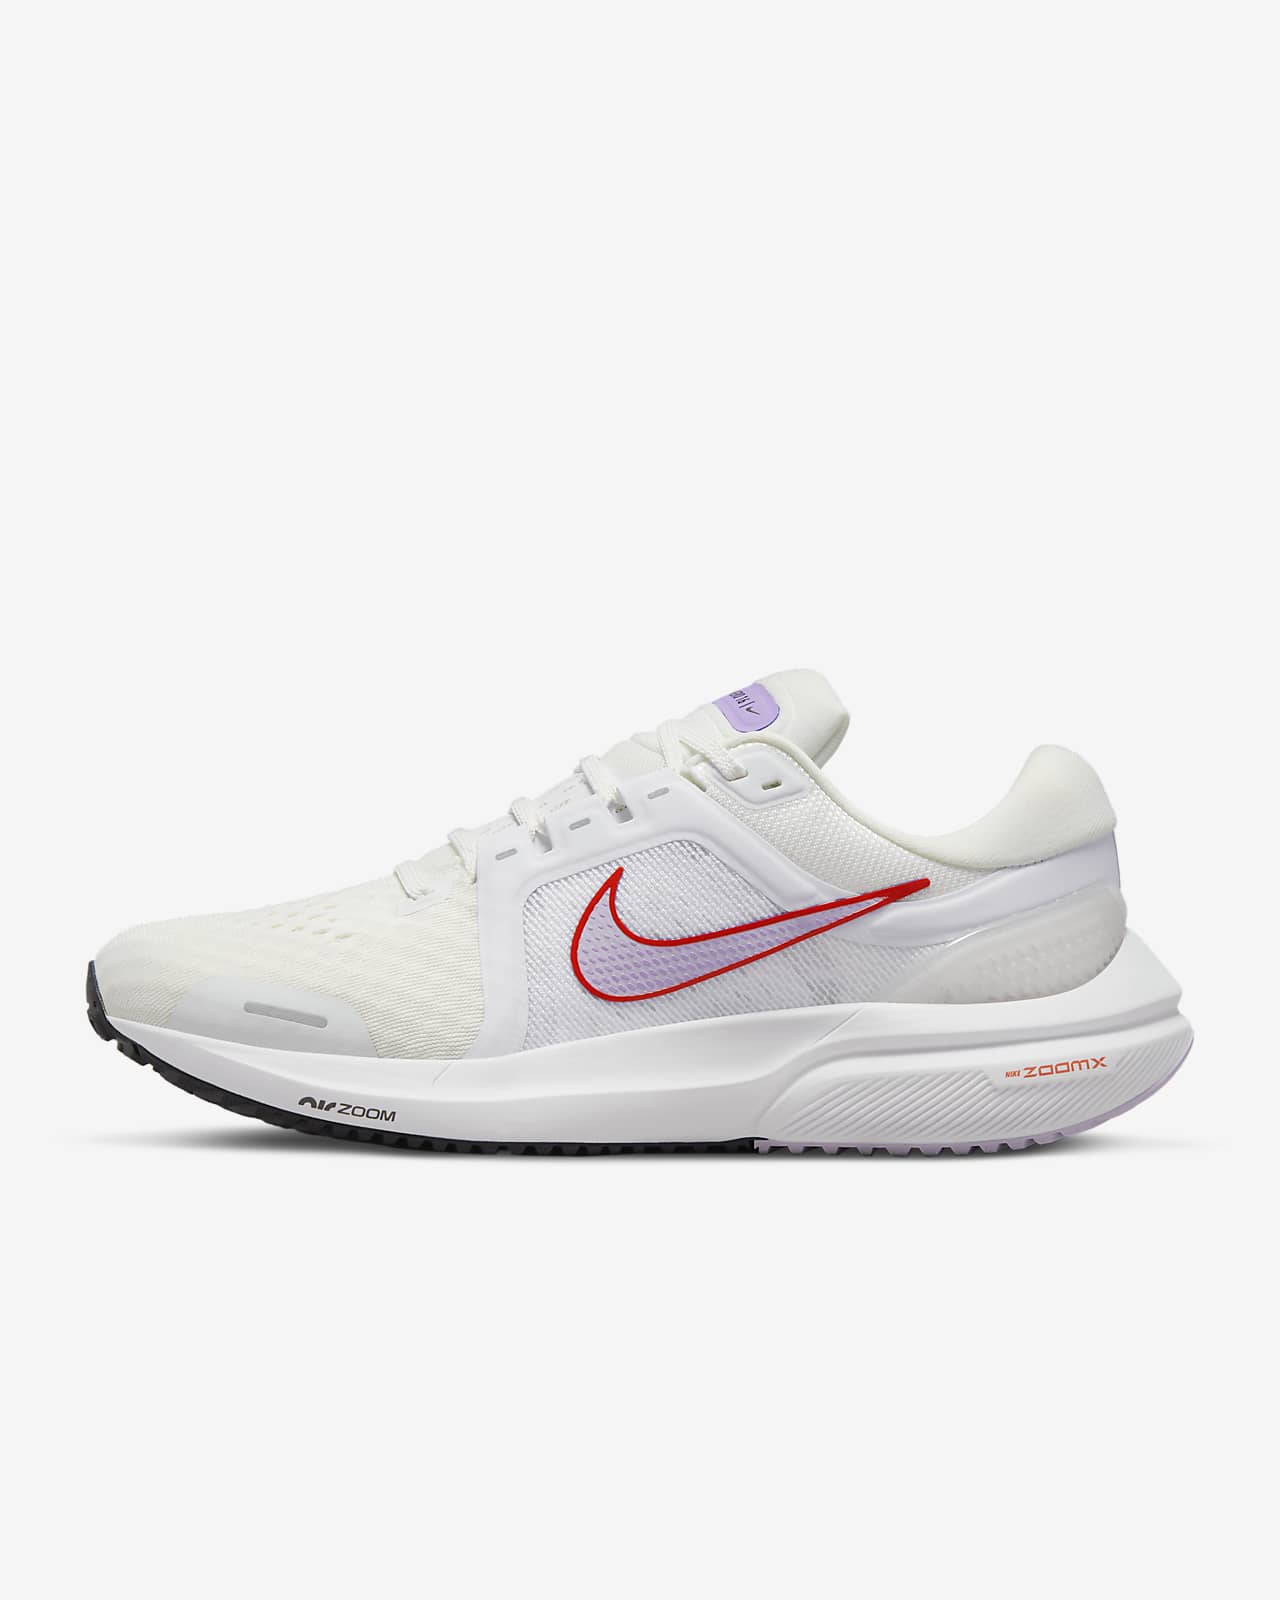 Nike Air Zoom Vomero 16 Women's Road Running Shoes